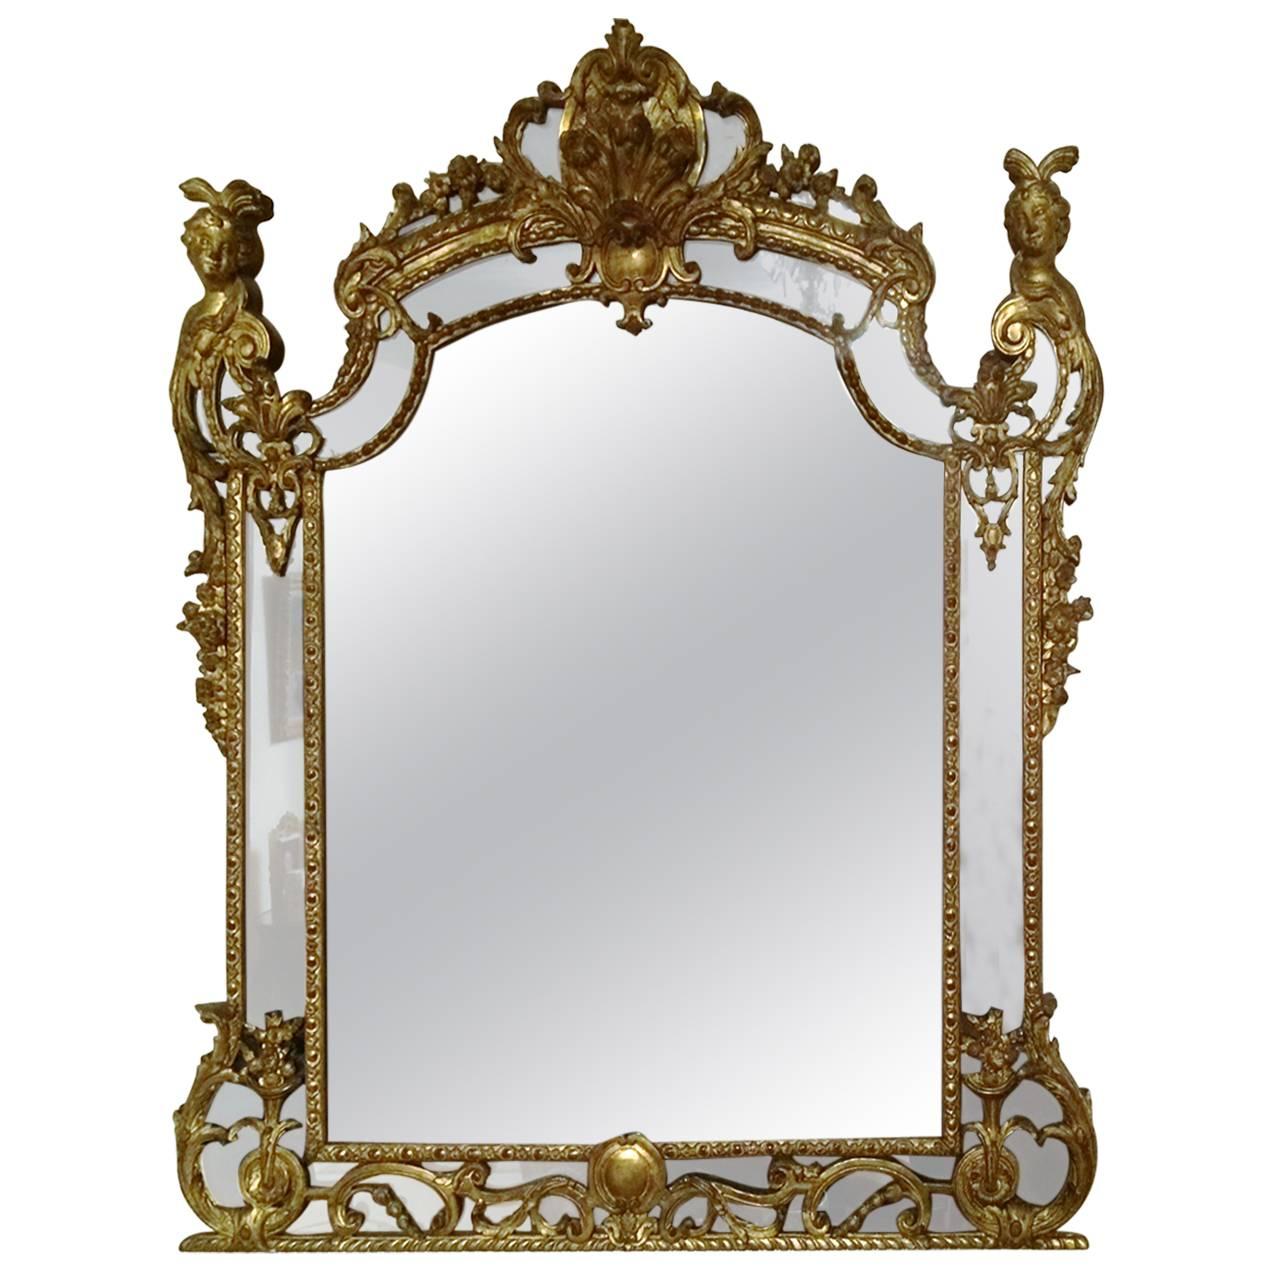 Exceptional French Regence Period Giltwood Boiserie Mirror, France, circa 1725 For Sale